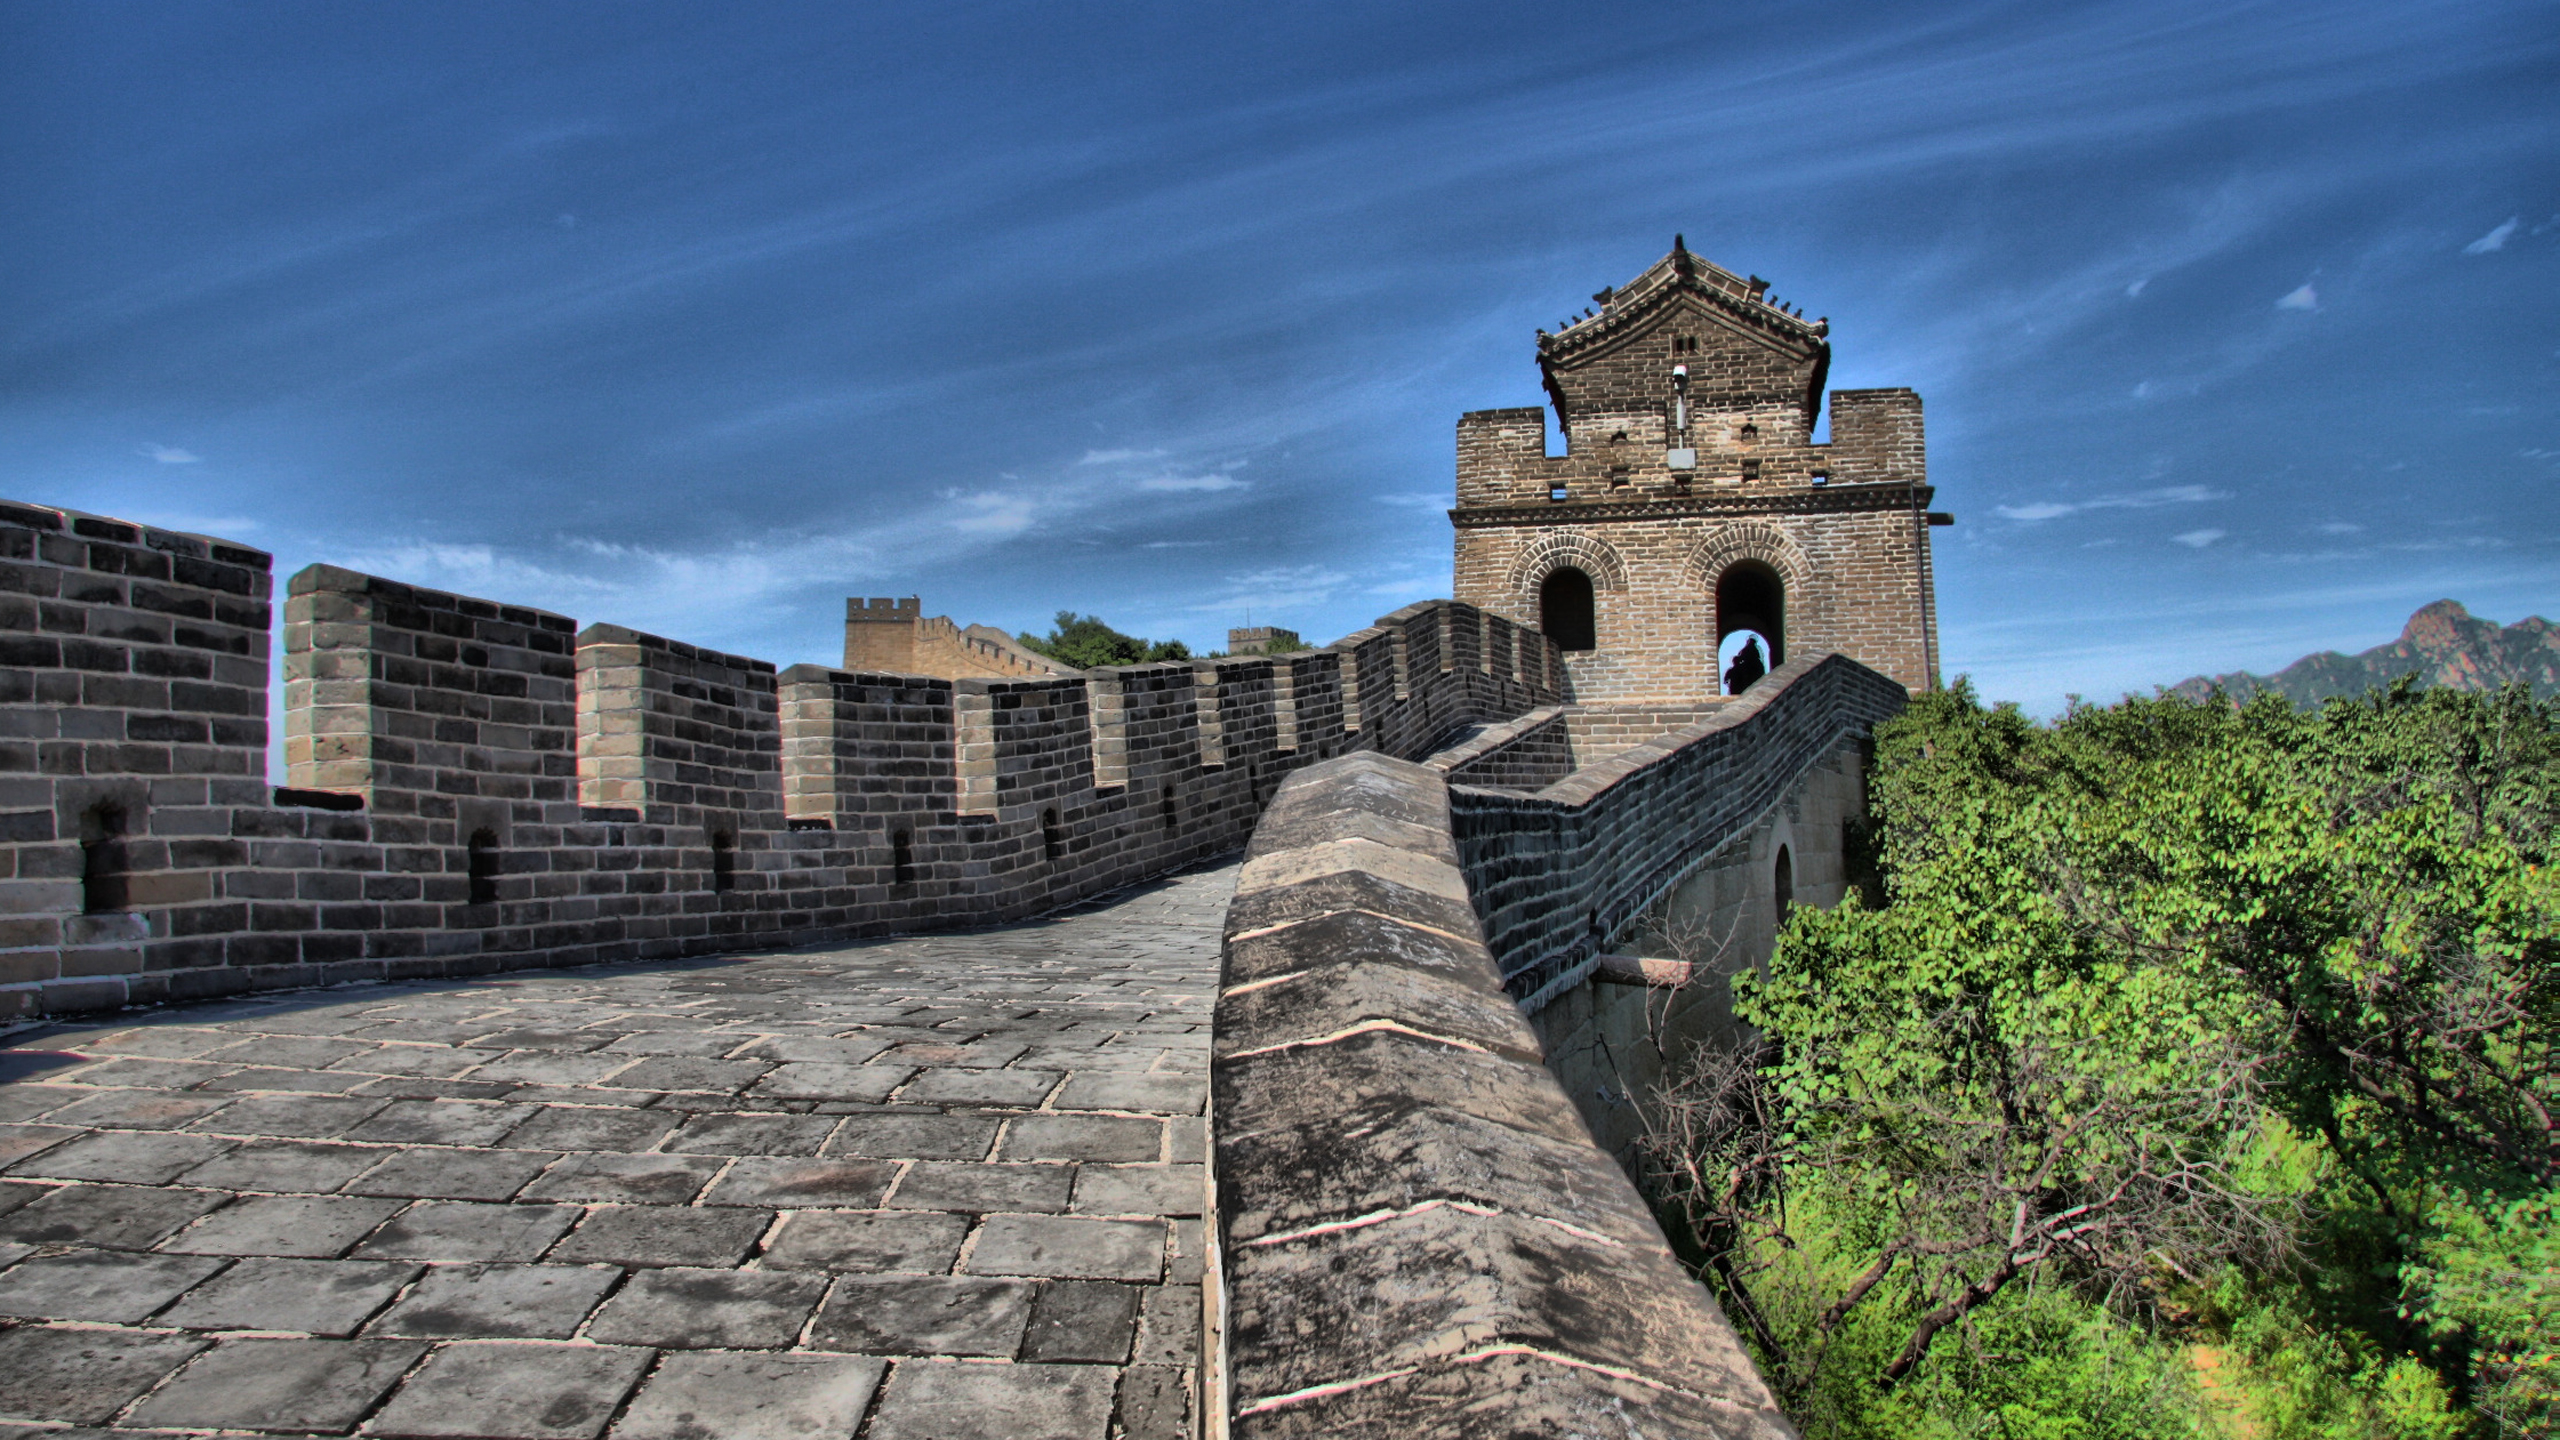 Great Wall Of China Wallpaper Q19g13a 4usky